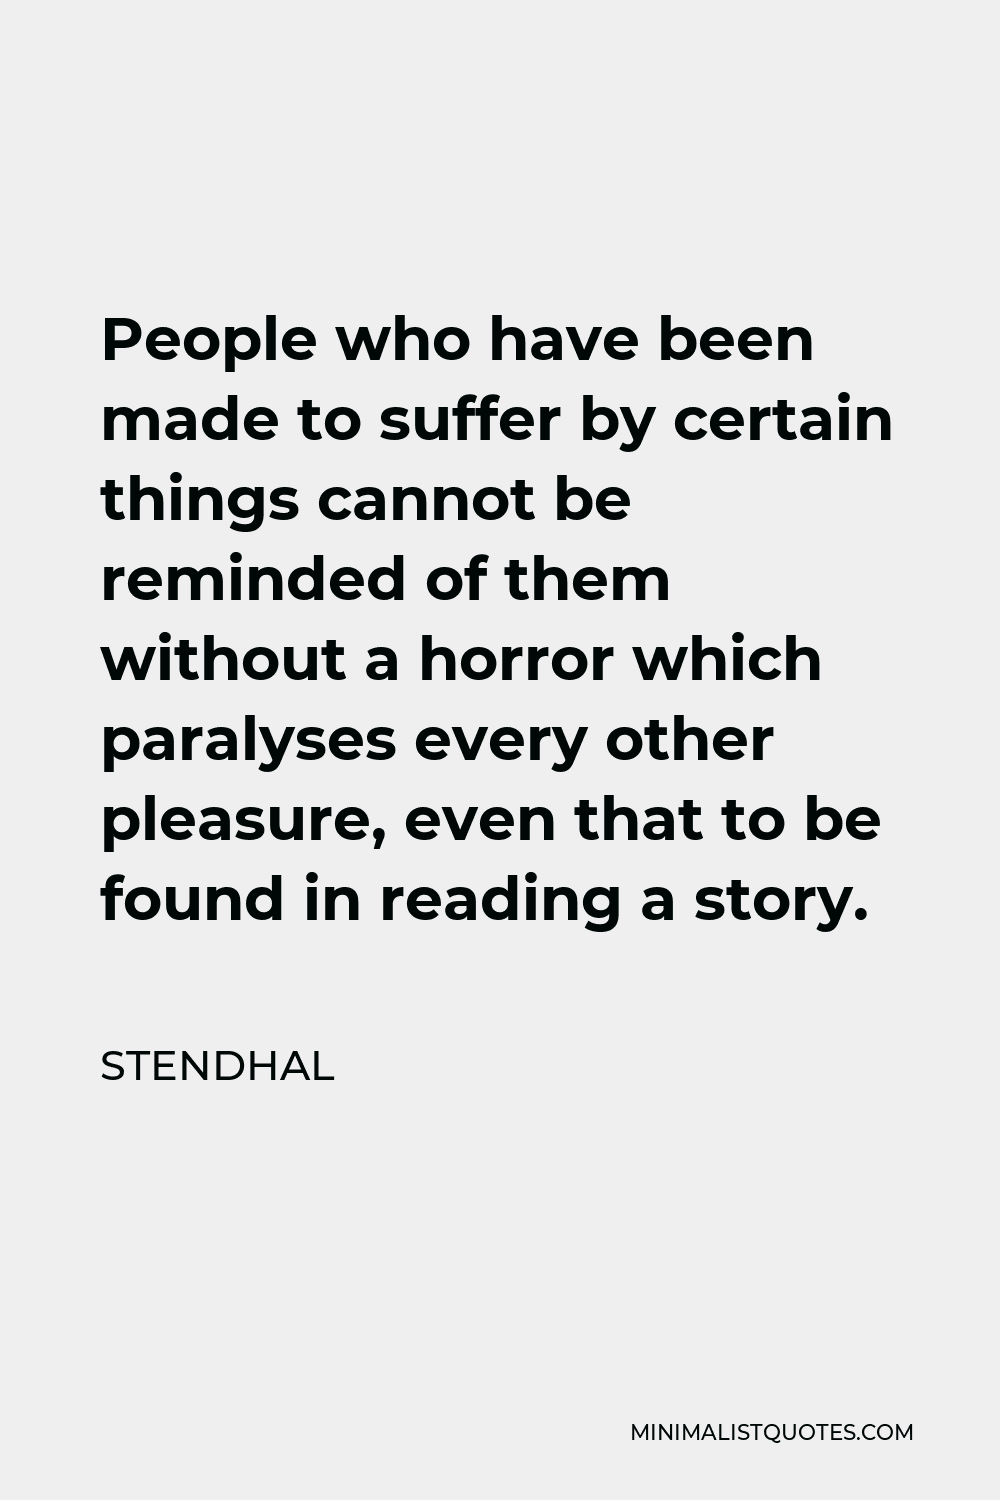 Stendhal Quote - People who have been made to suffer by certain things cannot be reminded of them without a horror which paralyses every other pleasure, even that to be found in reading a story.